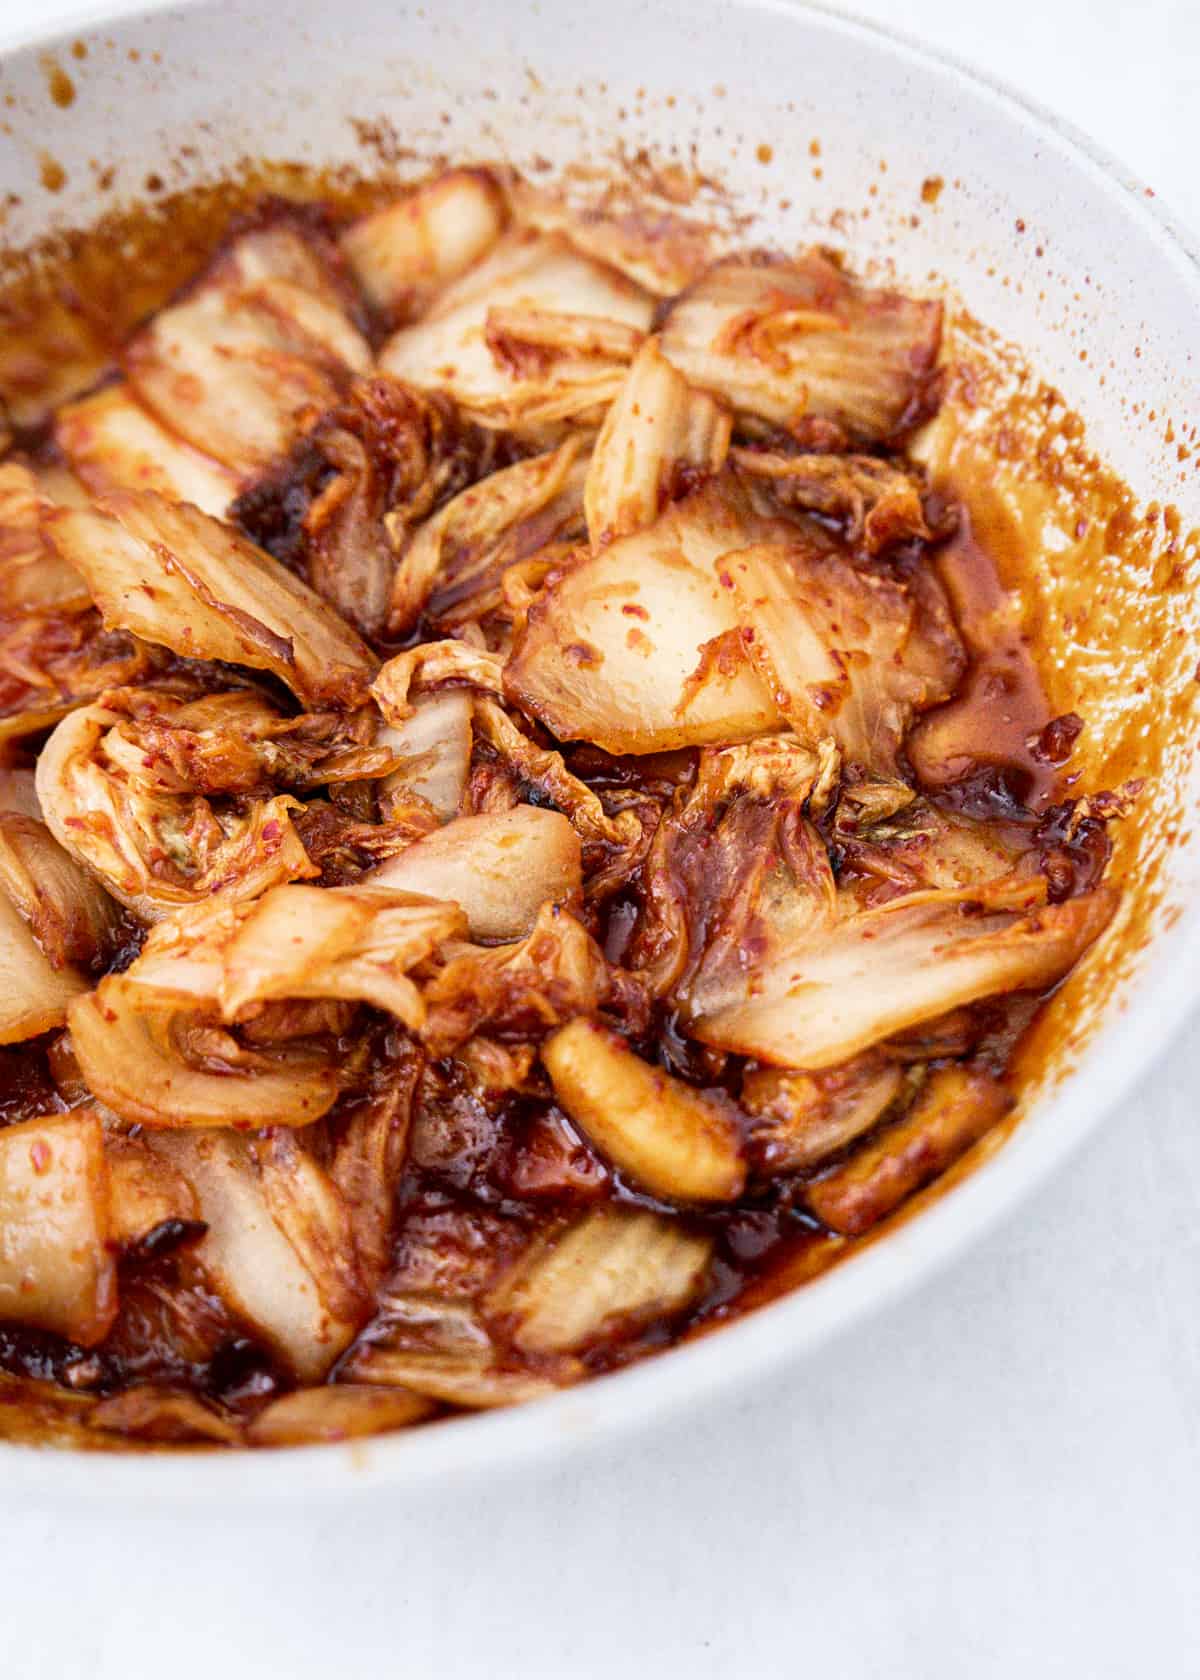 Easy Caramelized Kimchi Recipe (Brown Butter Sugar)